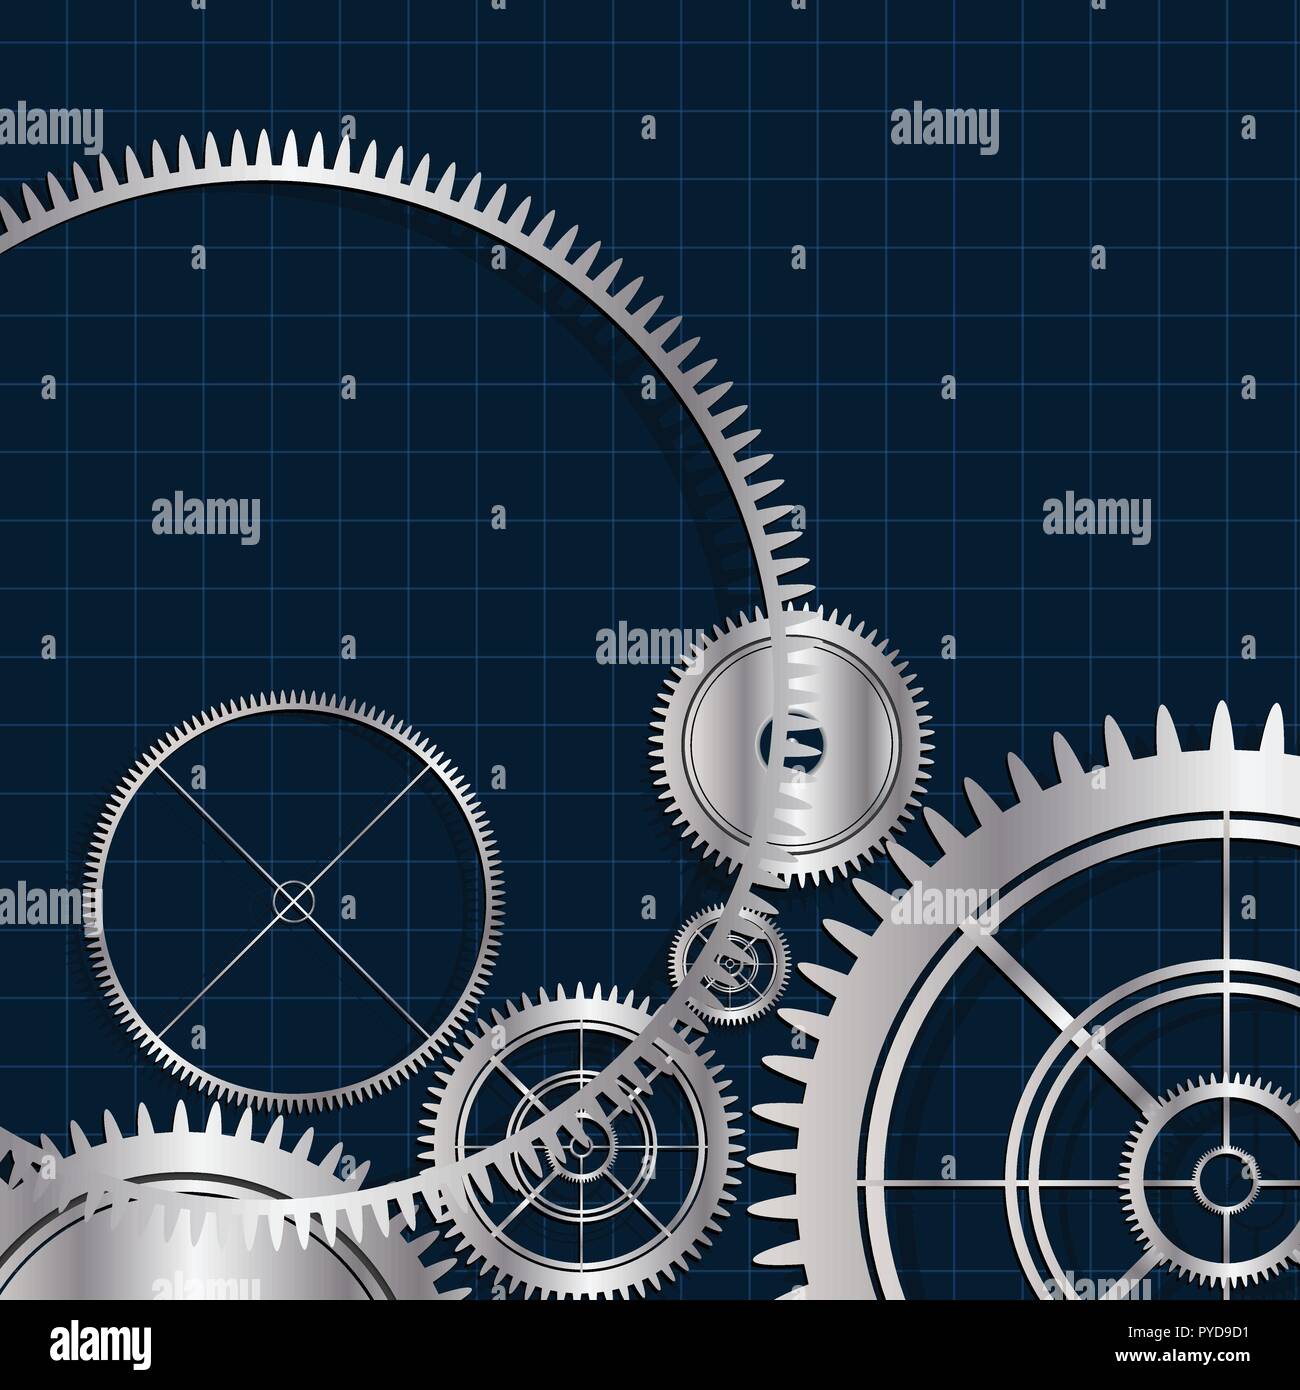 Set Of Gears For Unity Meaning Focus On Back Gear Of Pic On Isolated  Background Stock Photo, Picture and Royalty Free Image. Image 54599861.